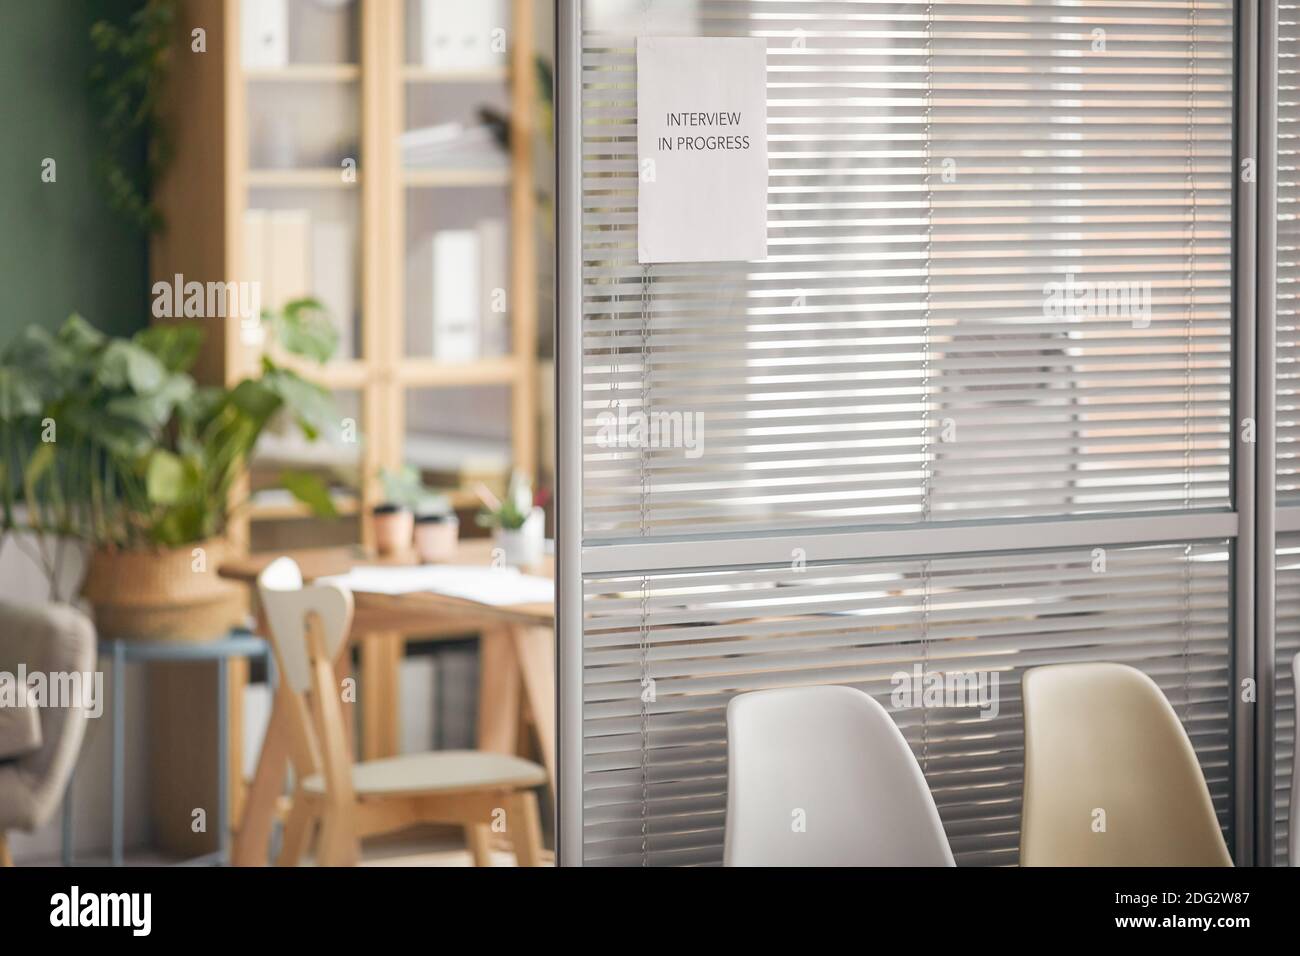 Background image of empty office room with sign Interview in progress on  glass wall, copy space Stock Photo - Alamy